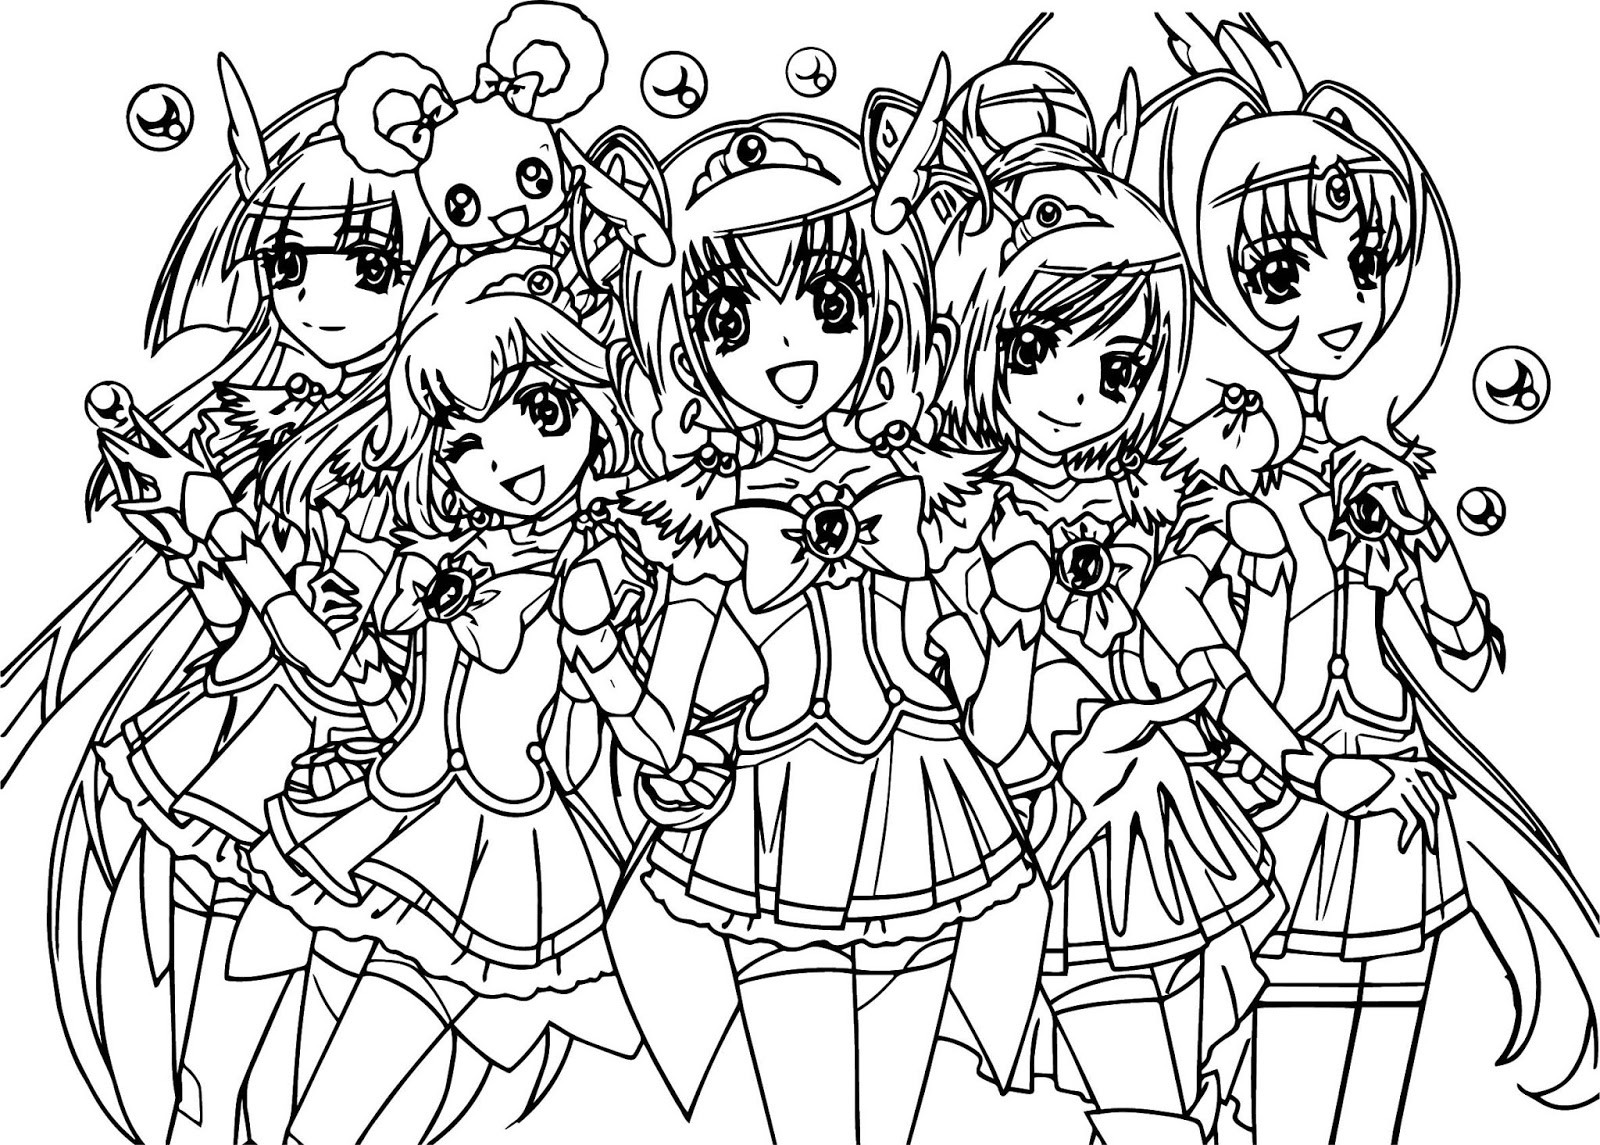 Glitter Force Coloring Pages   Free Printable Coloring Pages for Kids